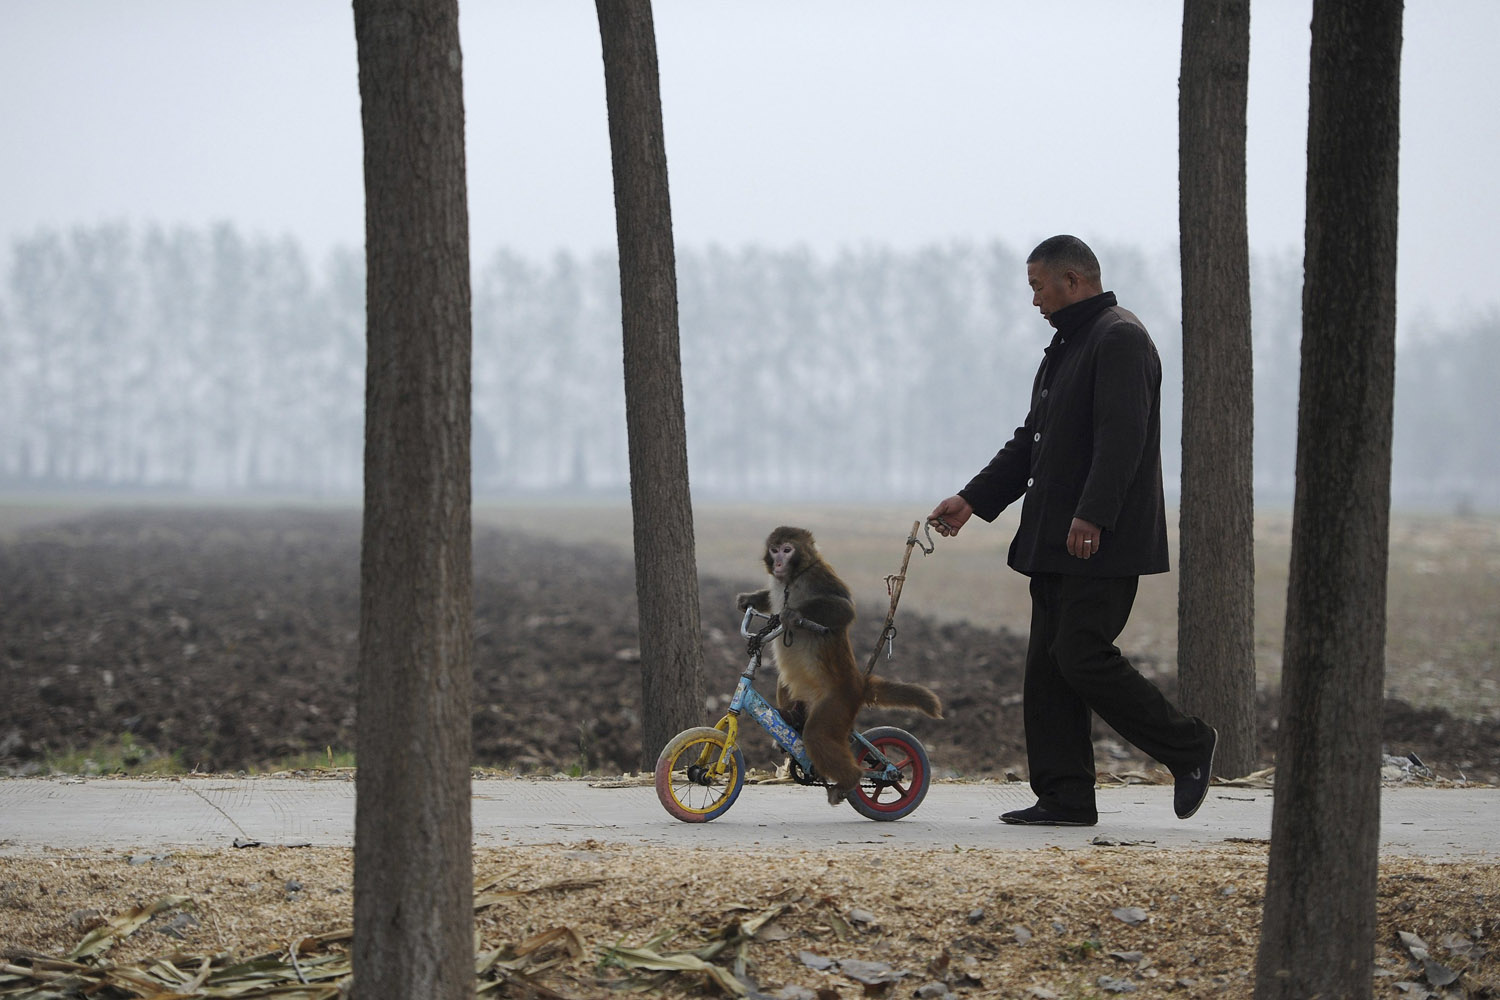 Image: Oct. 31, 2012. A 2-year-old macaque is trained to ride a bicycle in the village of Suzhou, Anhui province, China. Thousands of animals are raised and trained by over 300 circus groups in Suzhou.